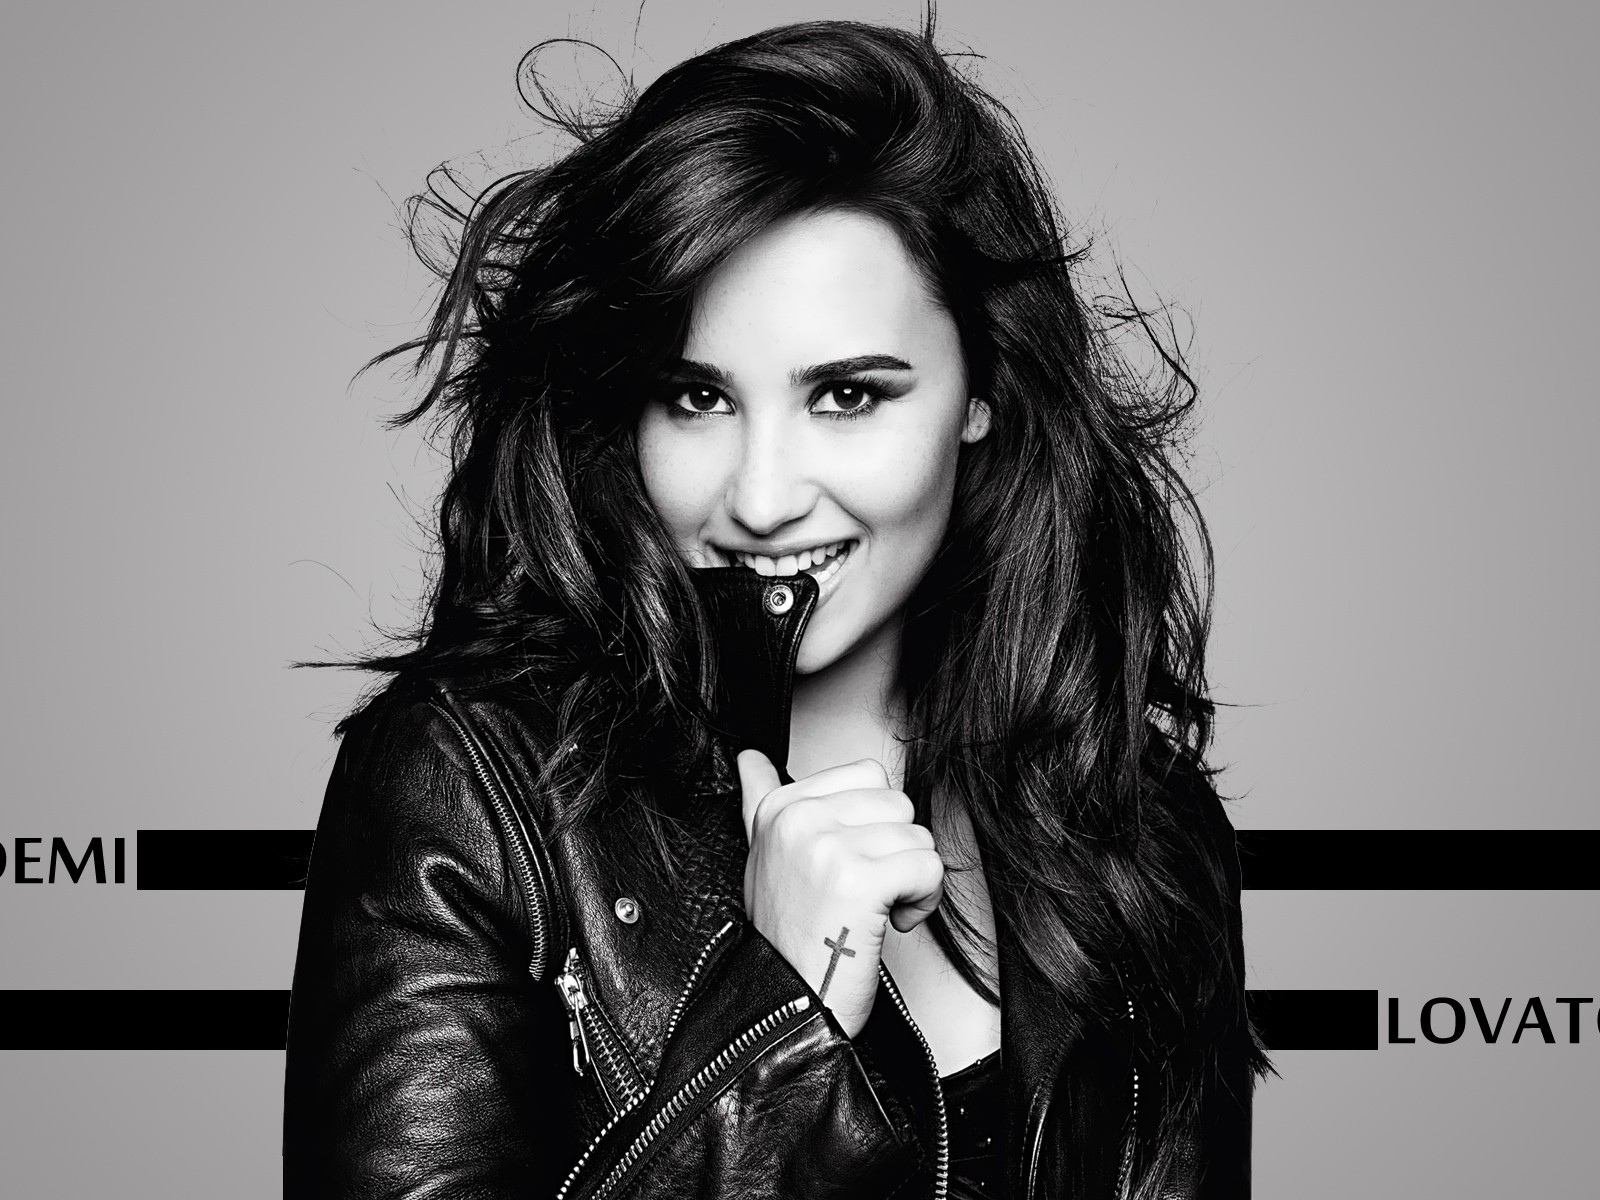 Demi Lovato Shooting for 1600 x 1200 resolution